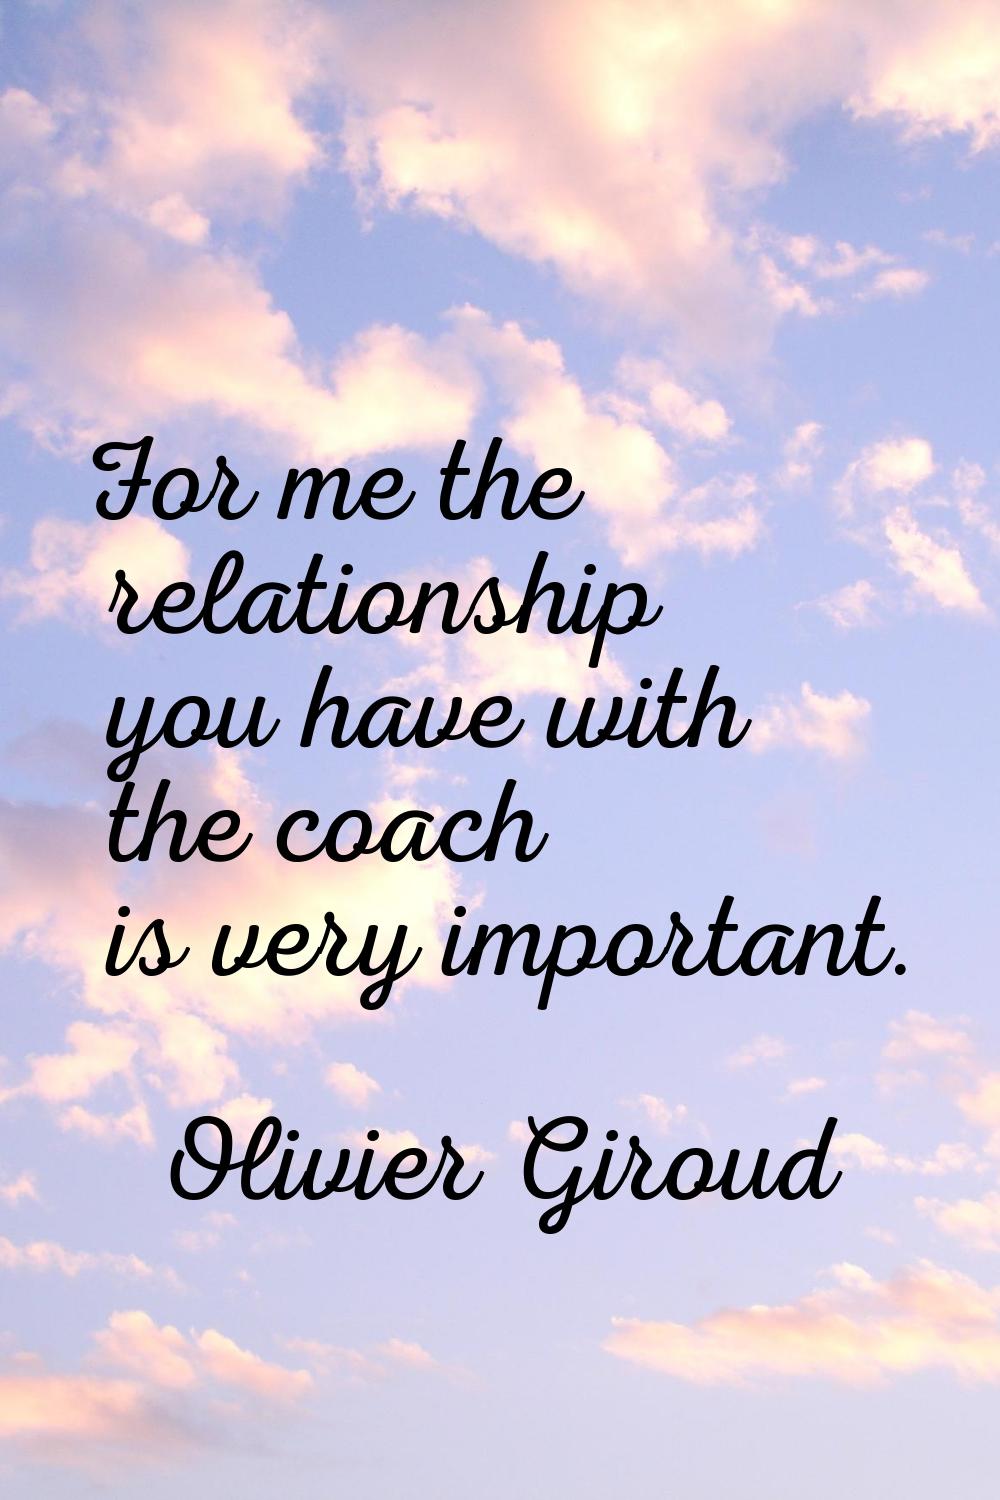 For me the relationship you have with the coach is very important.